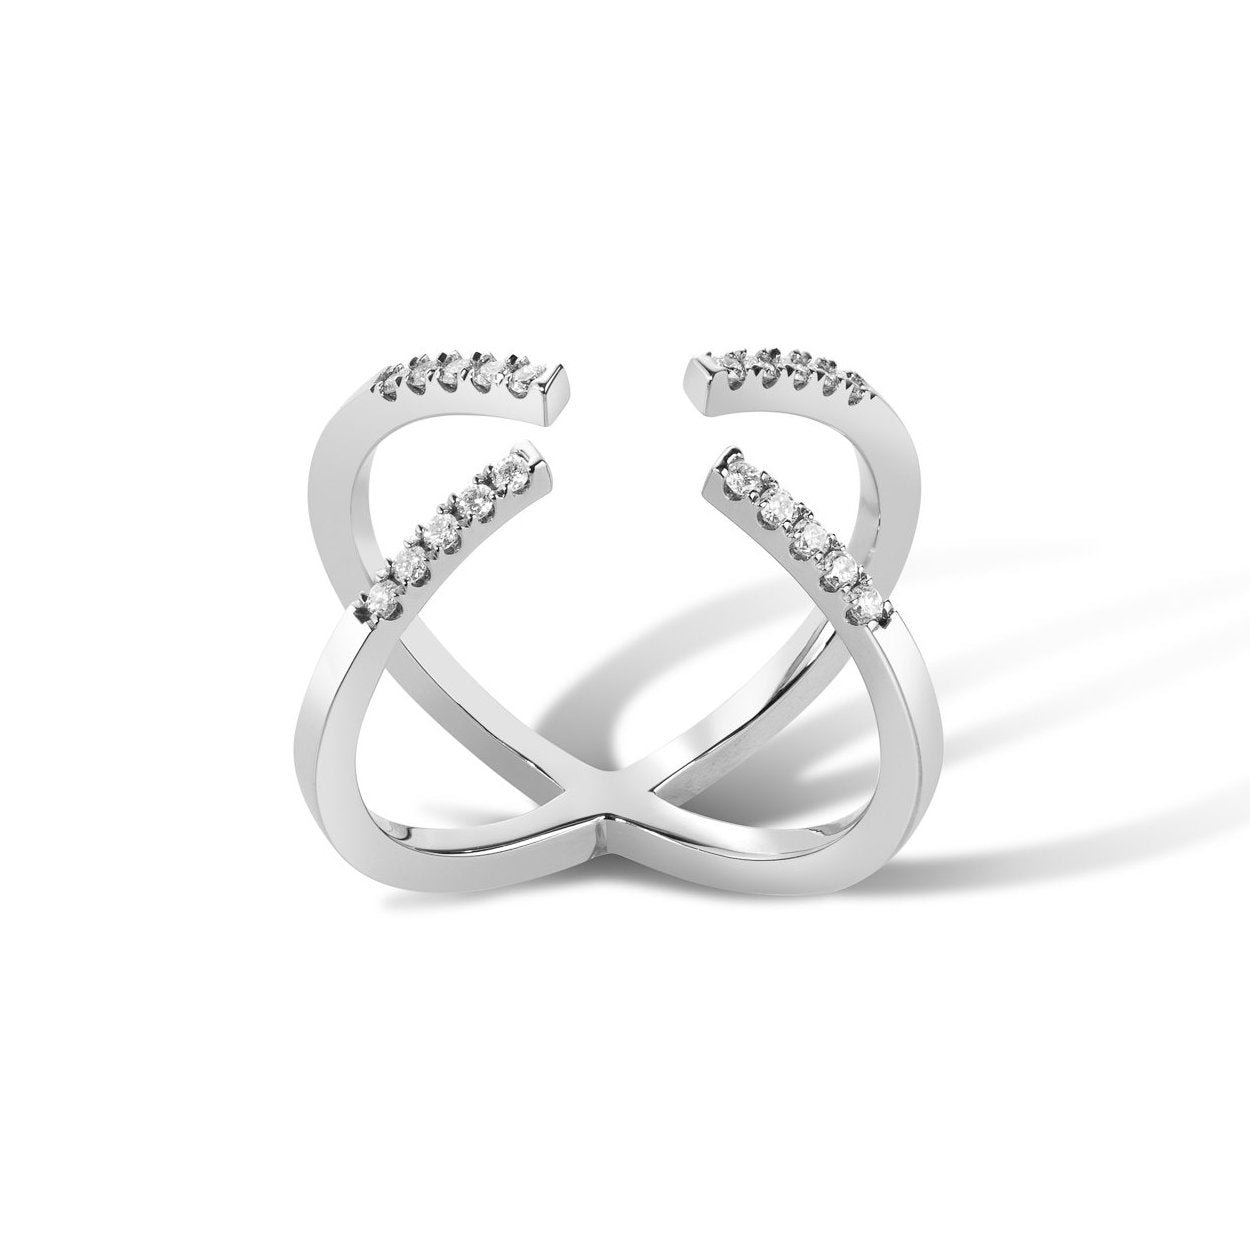 Shahla Karimi Jewelry Central Park X-Ring No. 3 in 14K White Gold With White Diamonds